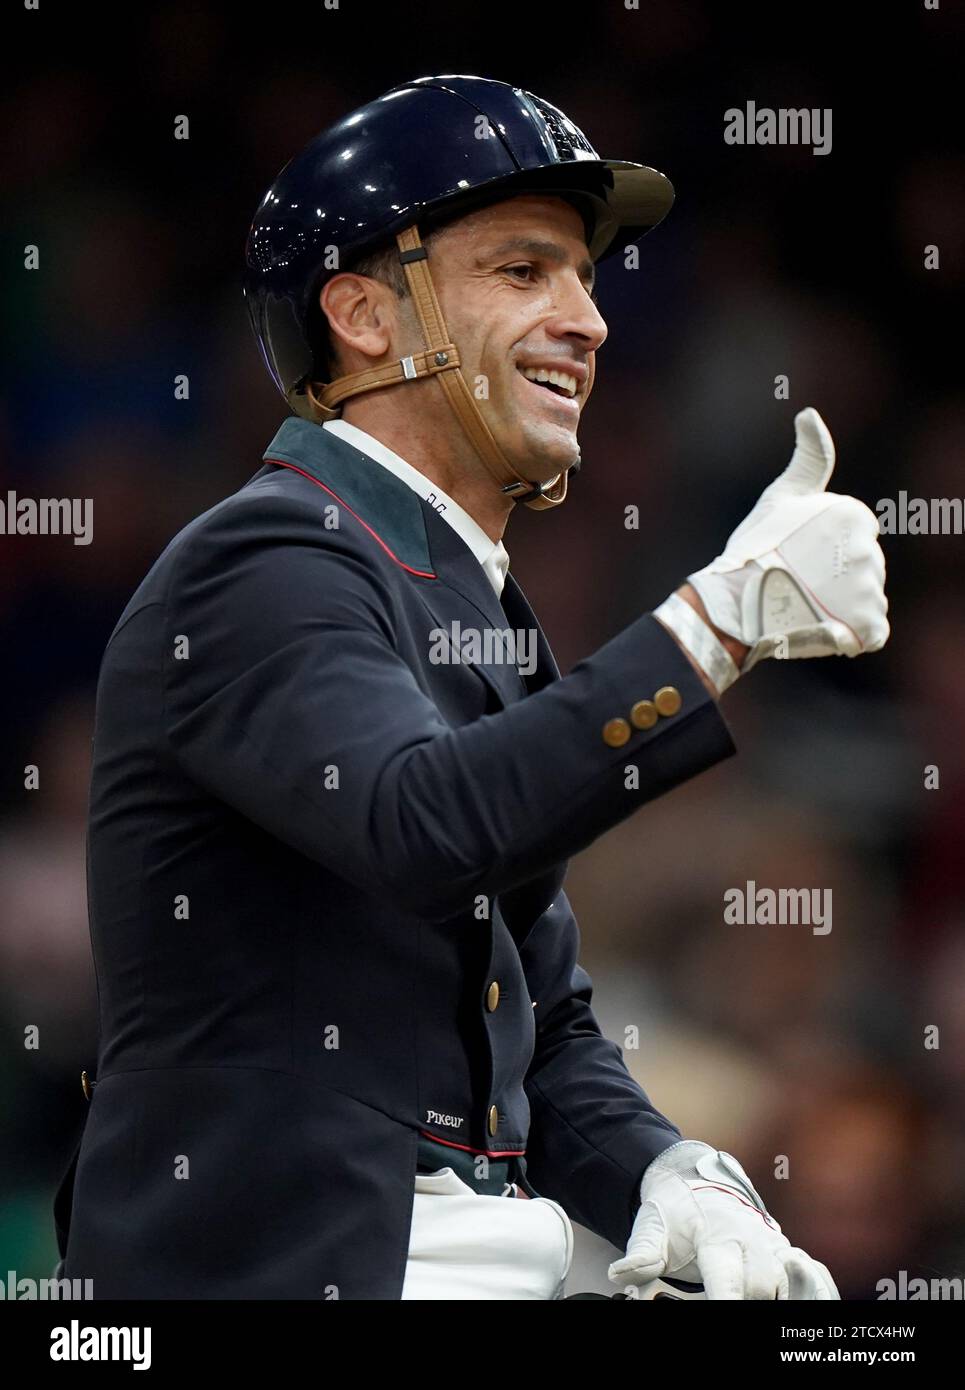 Jolene ridden by France's Alexandre Ayache reacts following their performance during the FEI Dressage World Cup on day two of the London International Horse Show at ExCel London. Picture date: Thursday December 14, 2023. Stock Photo